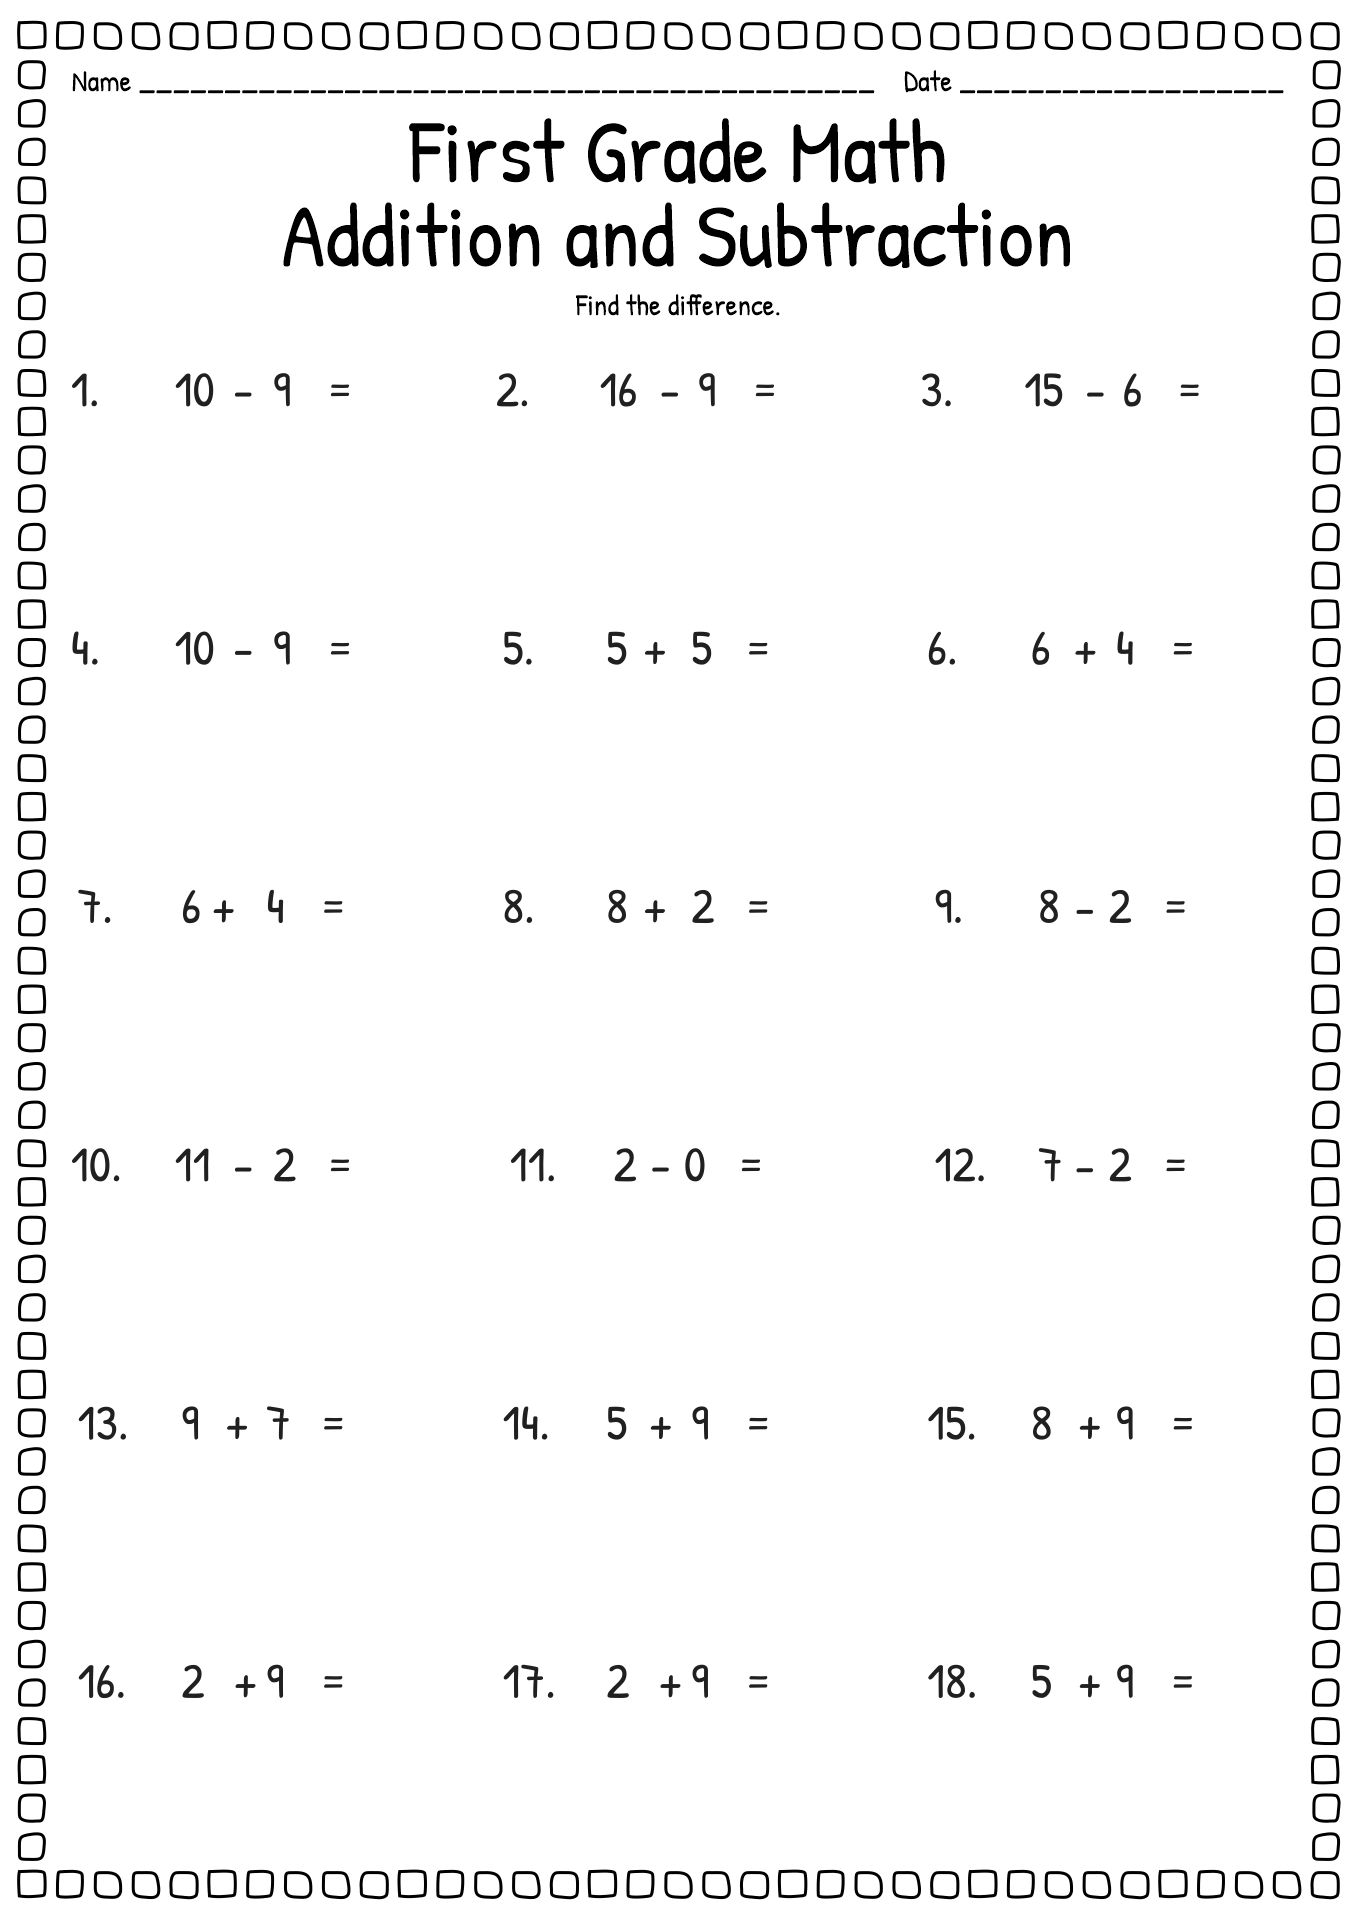 Printable Addition And Subtraction Worksheets For Grade 1